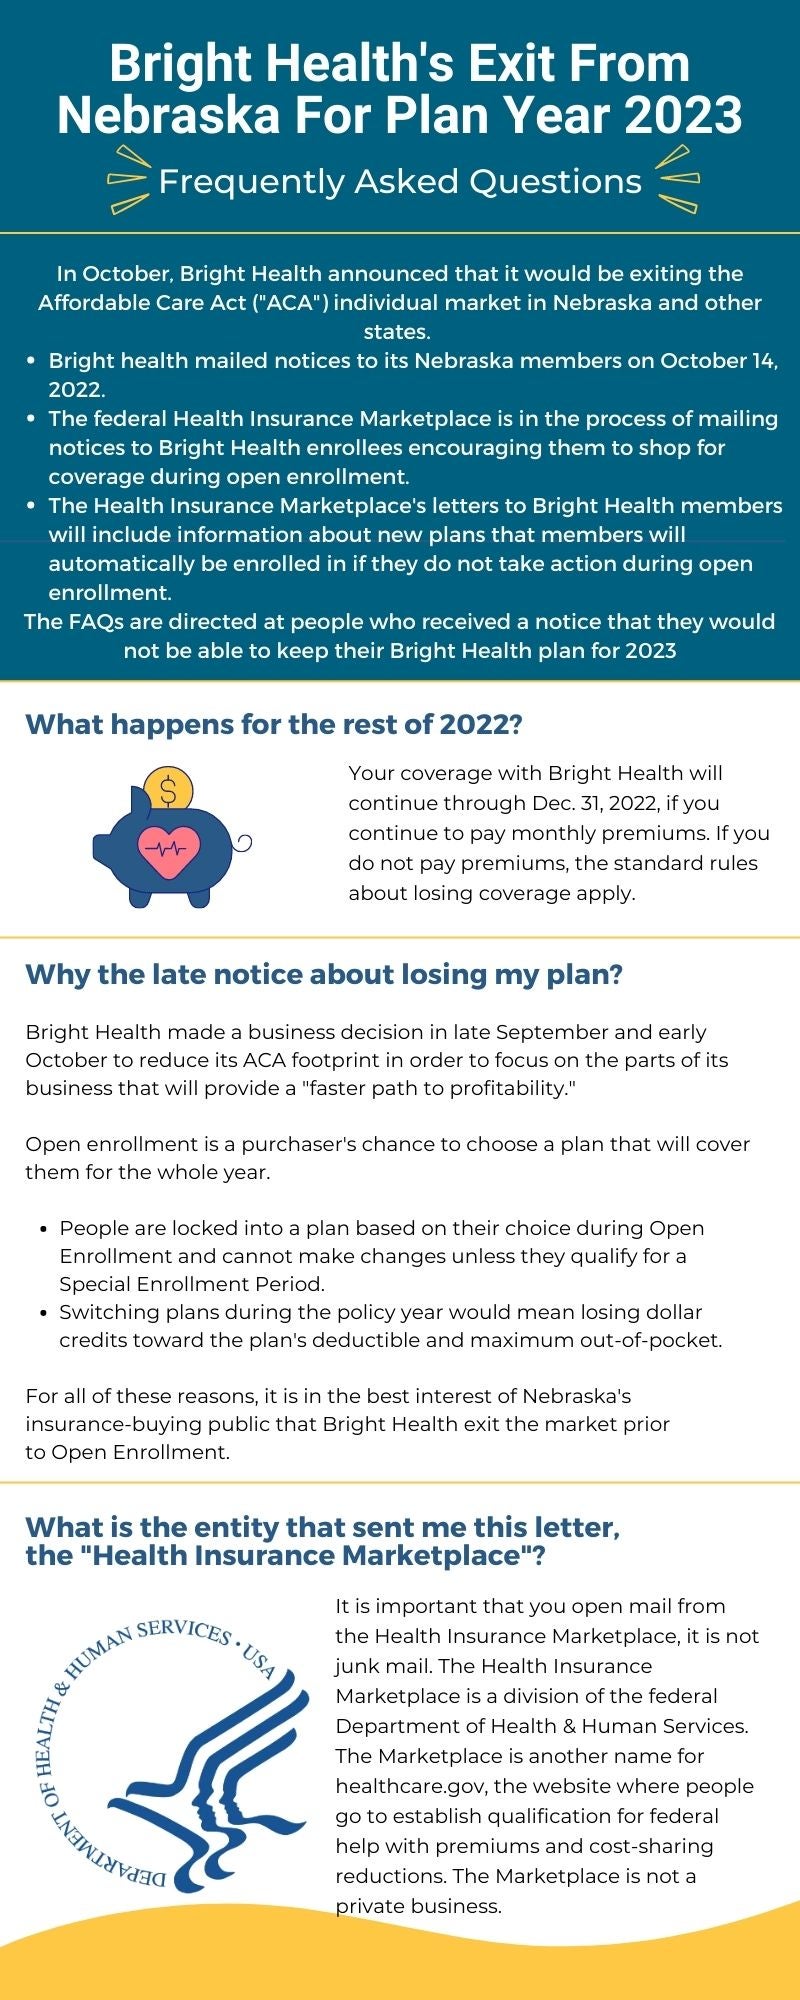 Bright Health's Exit From Nebraska For Plan Year 2023: Frequently Asked Questions 1